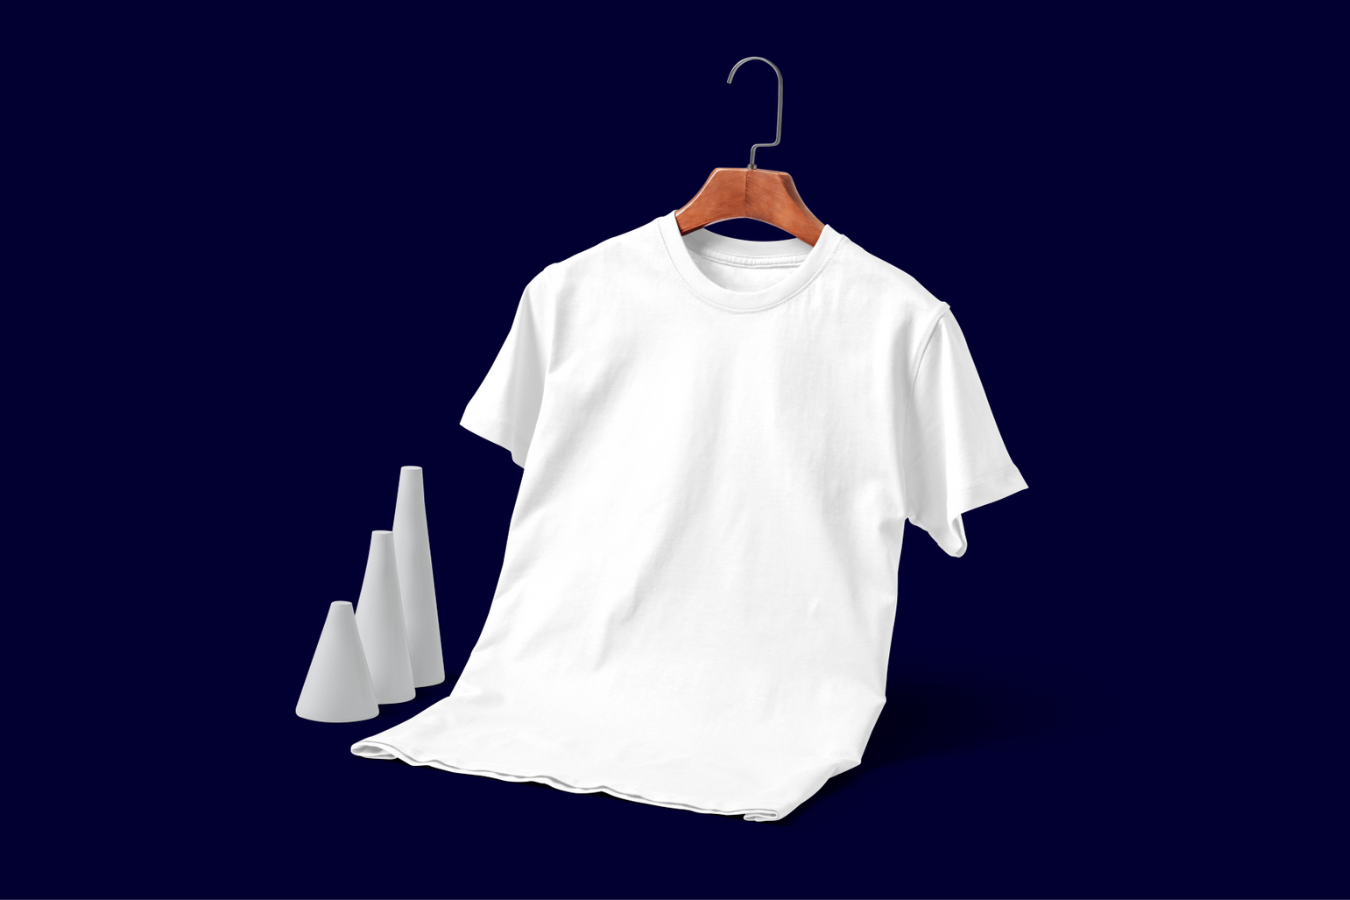 Plain white t-shirt on a hanger against a navy blue background, flanked by abstract white shapes.